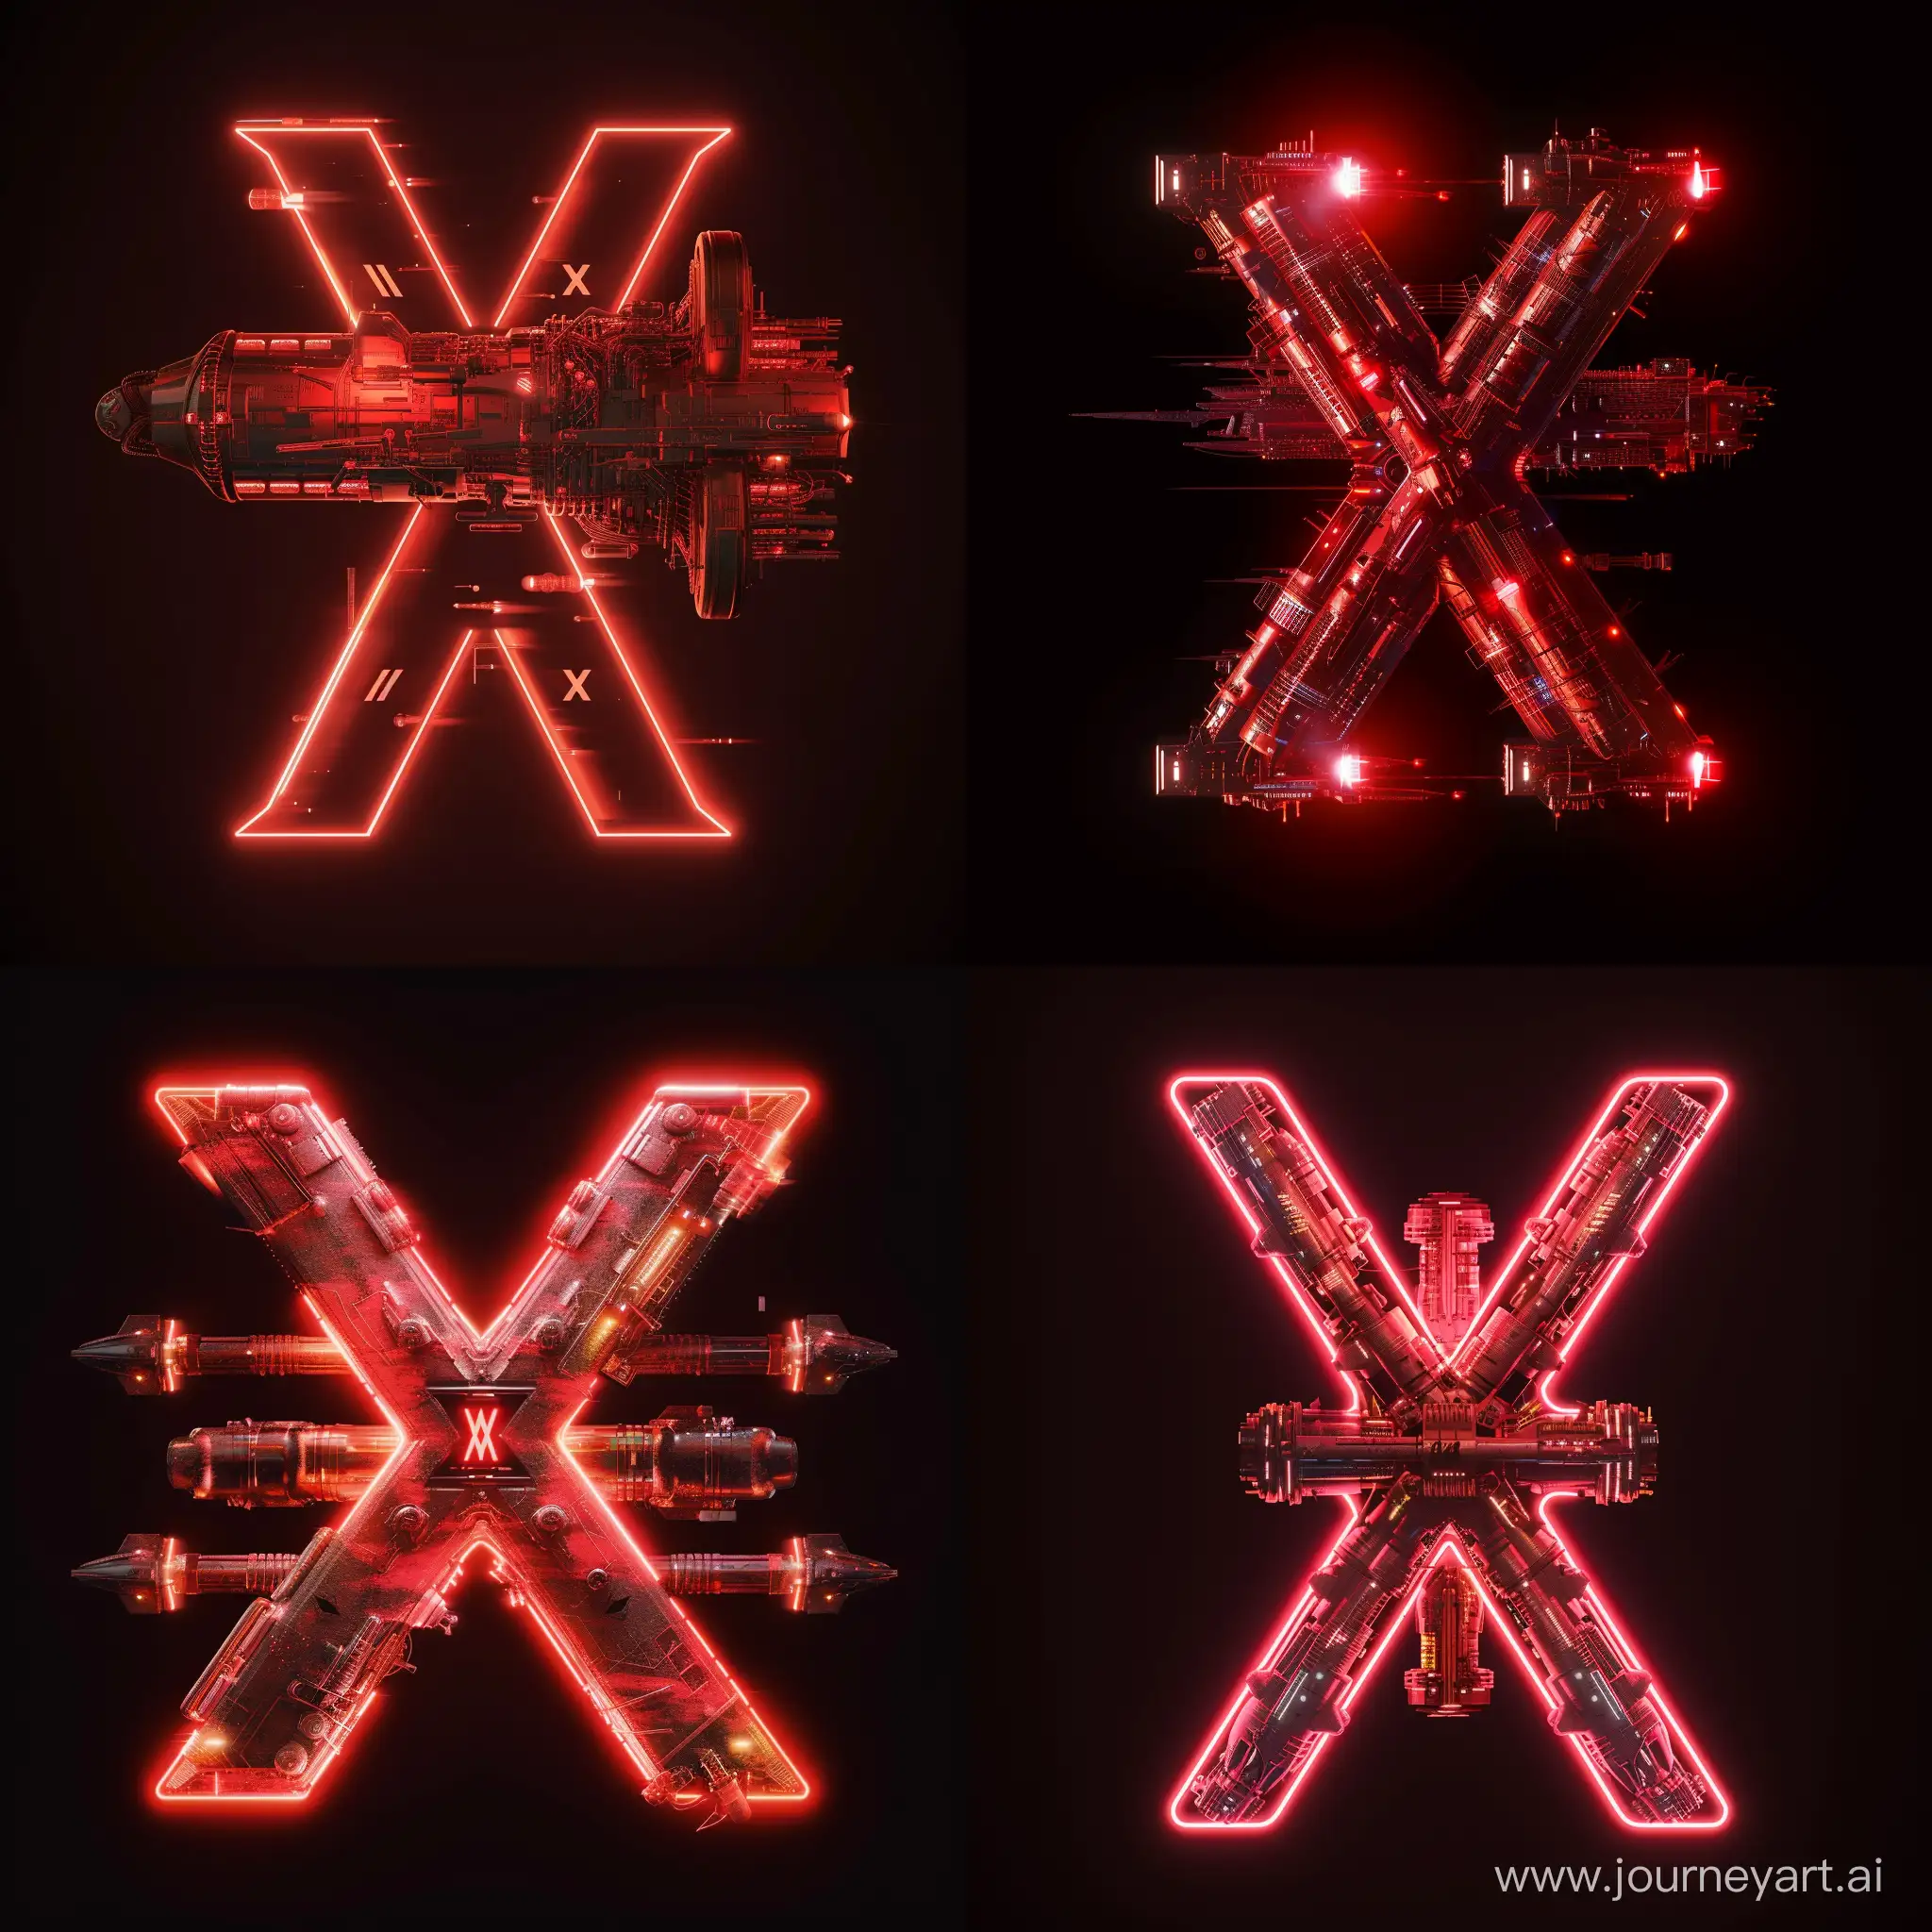 Letter X consisting of futuristic maschinery or starships, ruby red colour, bright red, glowing, futuristic, retrofuturism